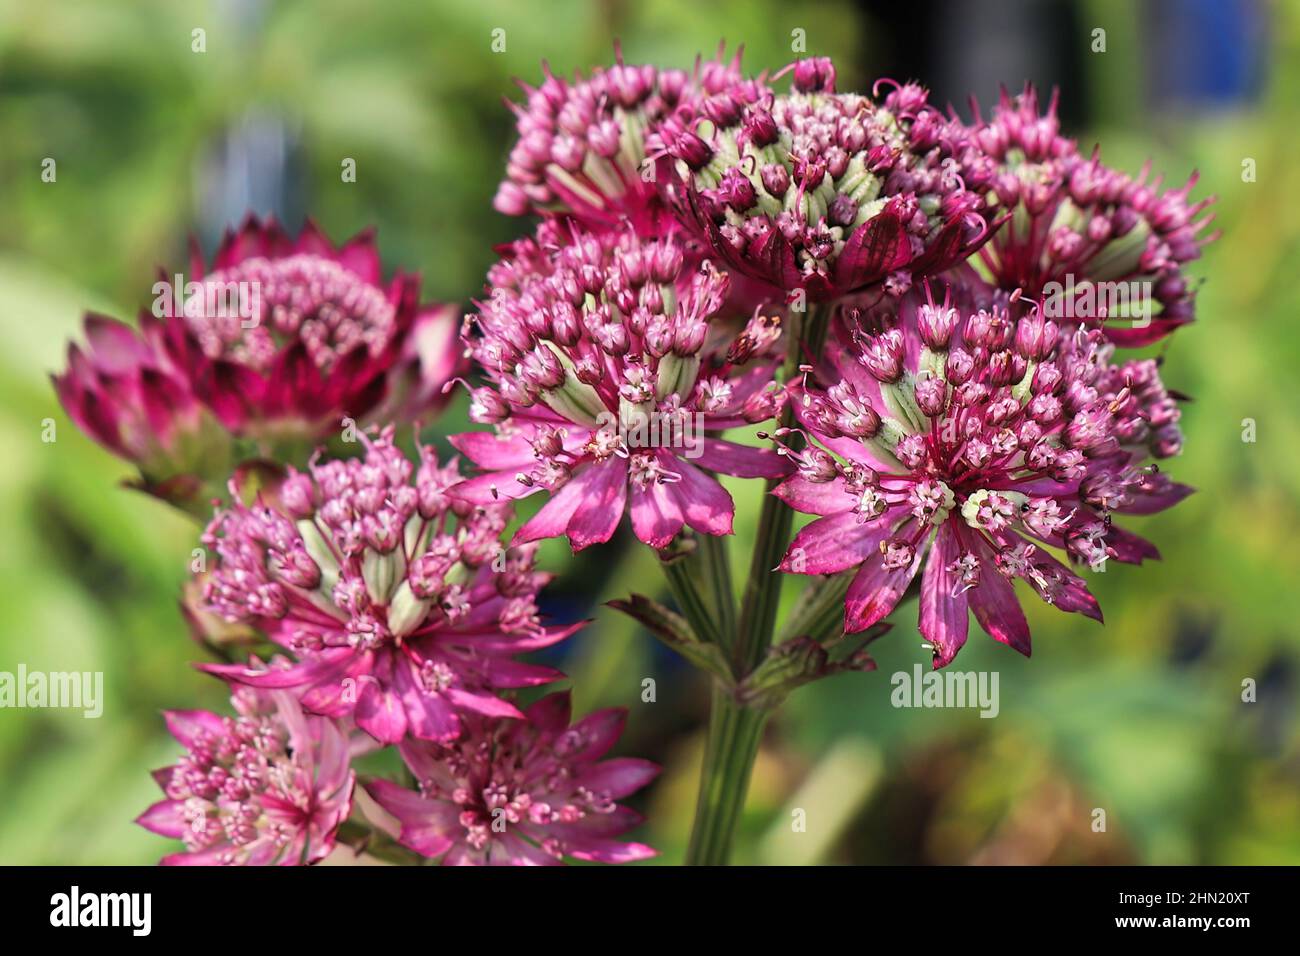 Delicate view of pink masterwort flower heads Stock Photo